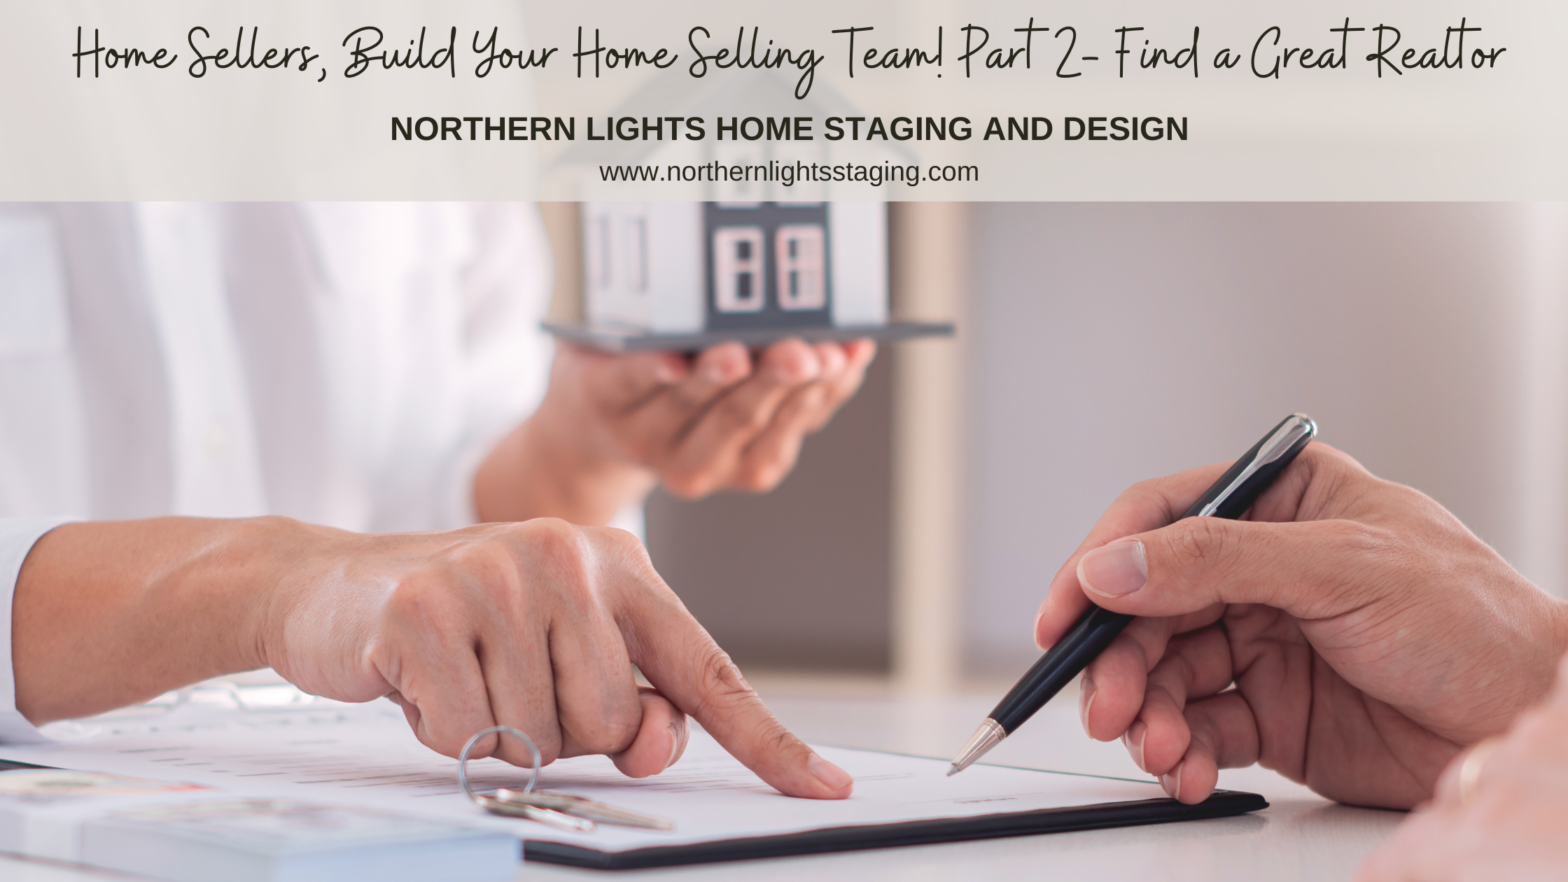 Build Your Home Selling Team Part 2- Find a Great Realtor